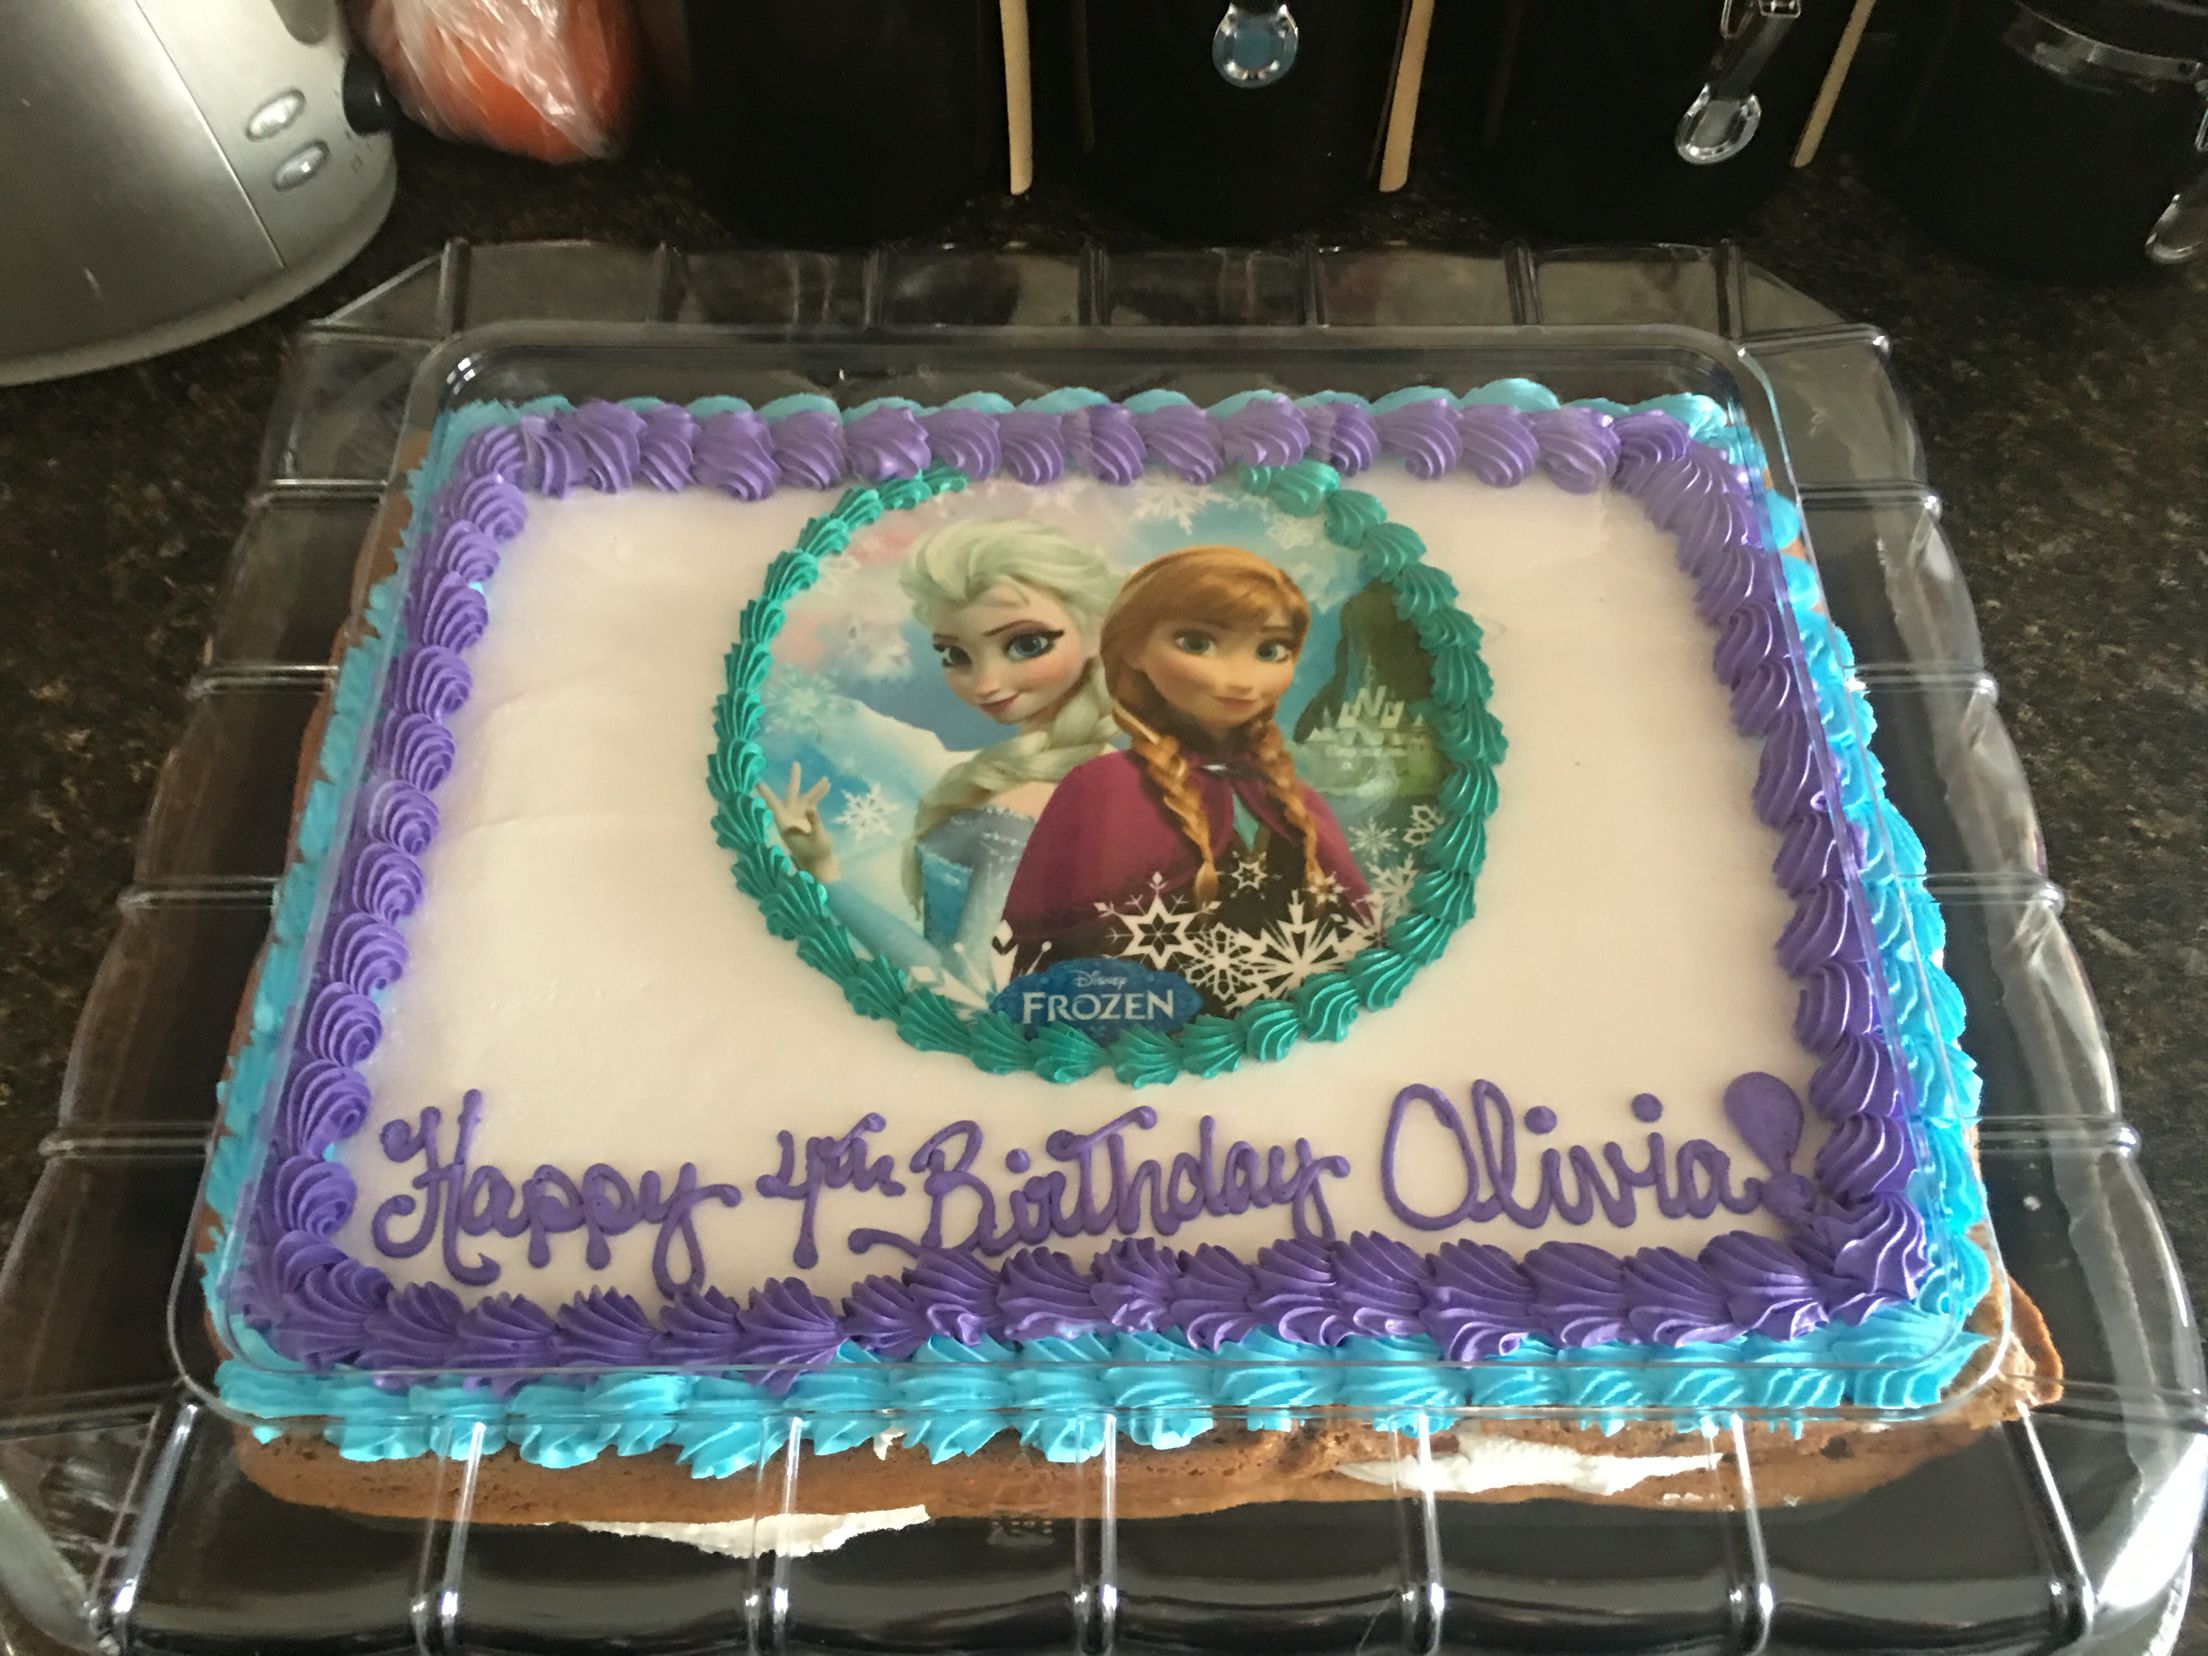 Frozen themed cookie cake. Ordered from Sam